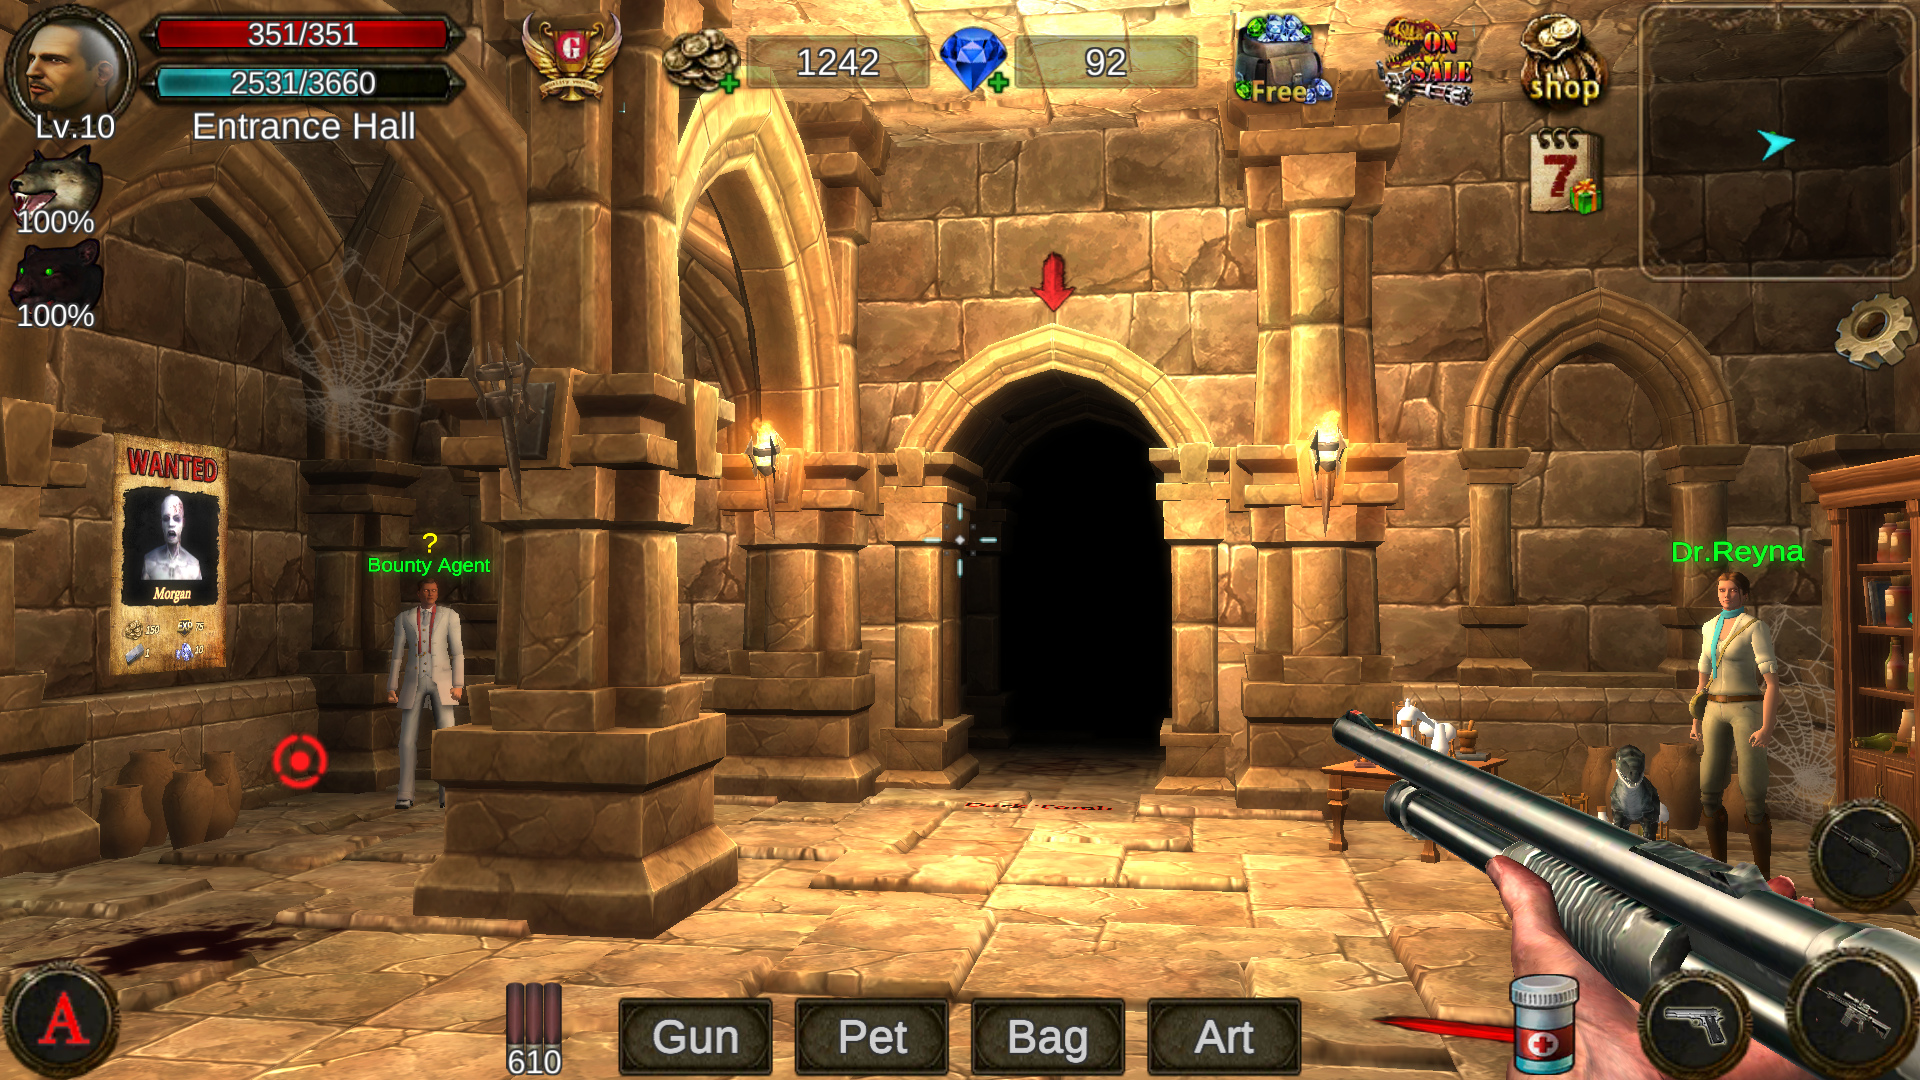 Dungeon Shooter mod apk free download